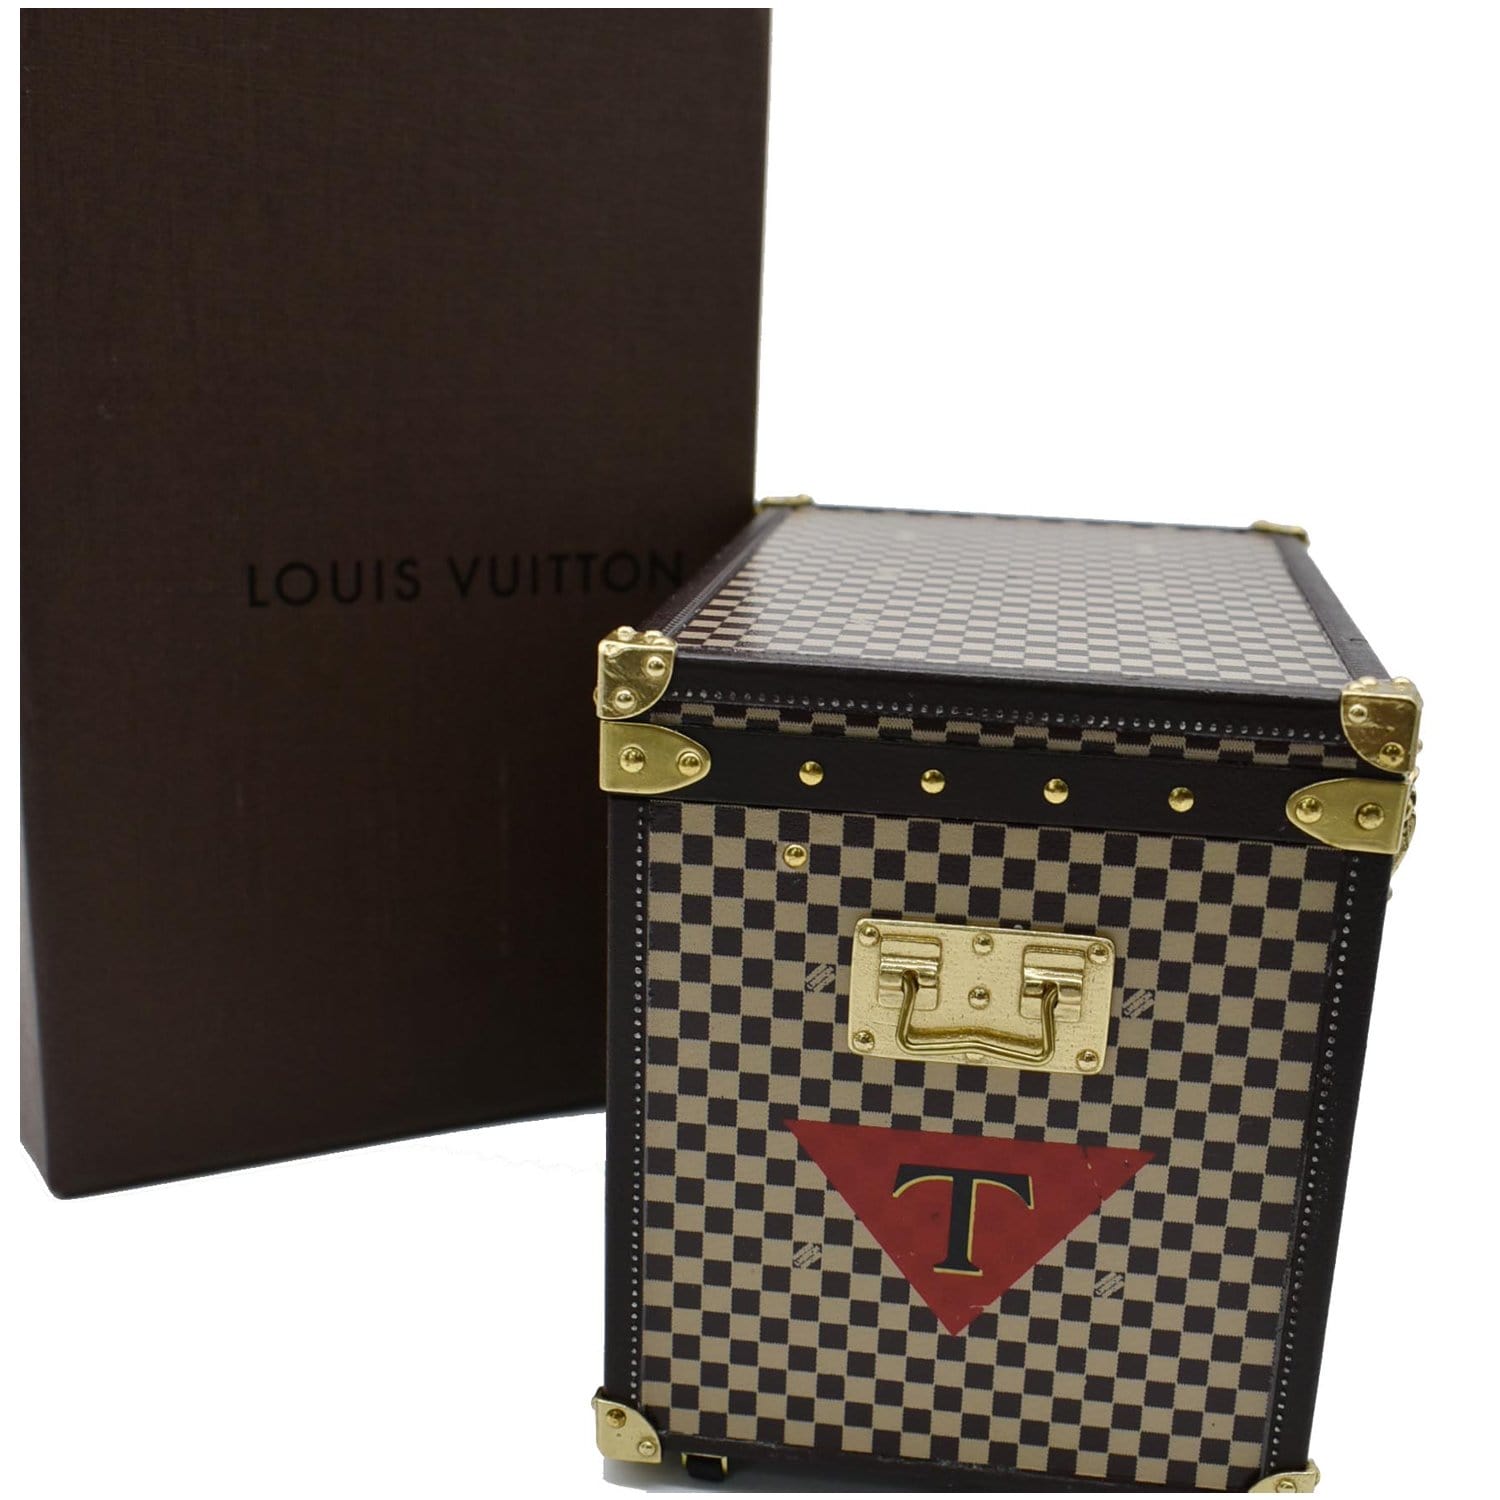 LOUIS VUITTON Novelty gift Trunk Jewelry box case VIP MINI MALLE COURRIER  1888